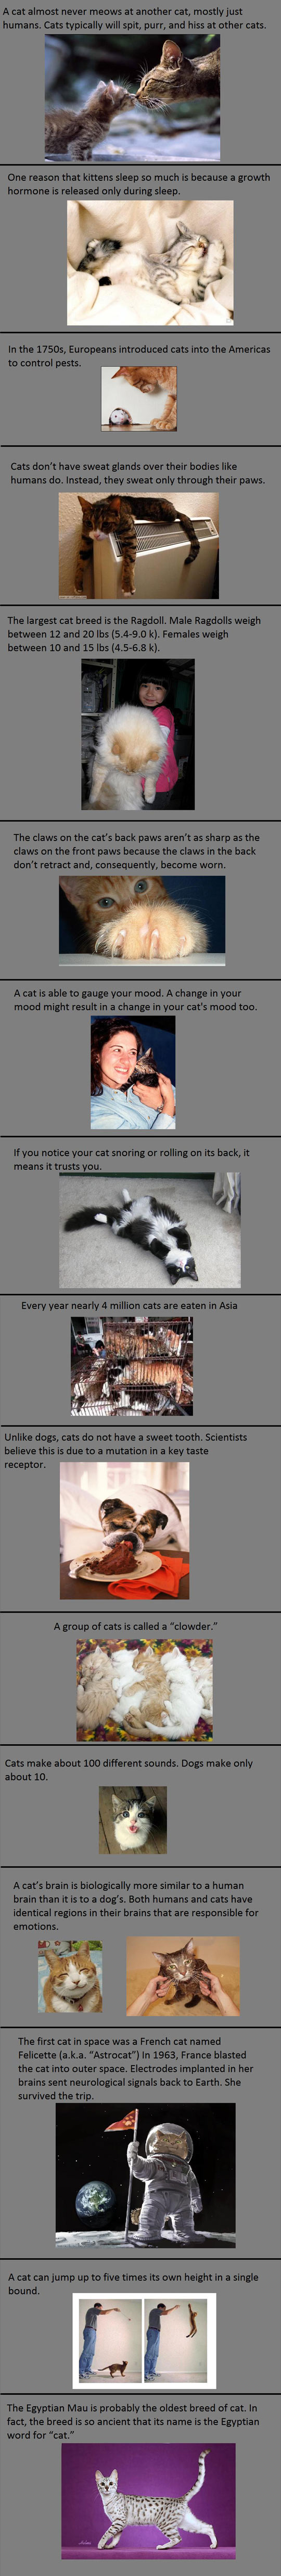 Some facts about cats.